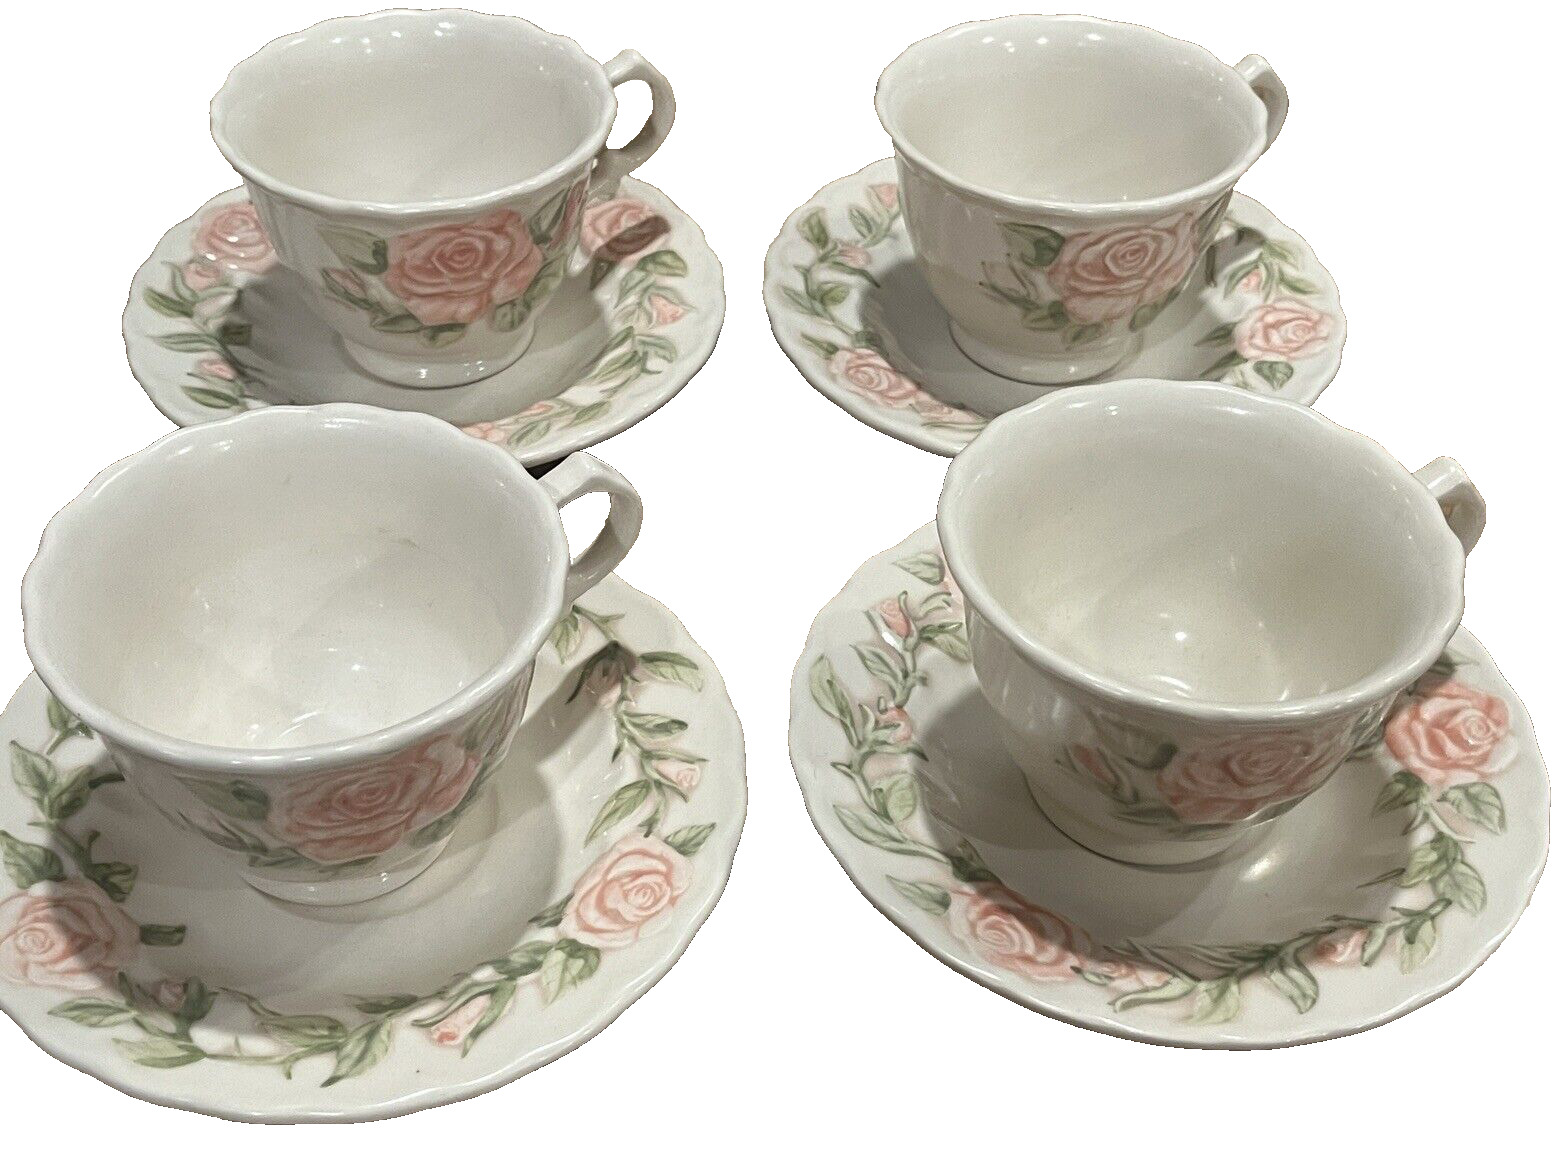 Vintage Shabby Chic Vernonware by Metlox Rose Pink Cup & Saucer Set of 4